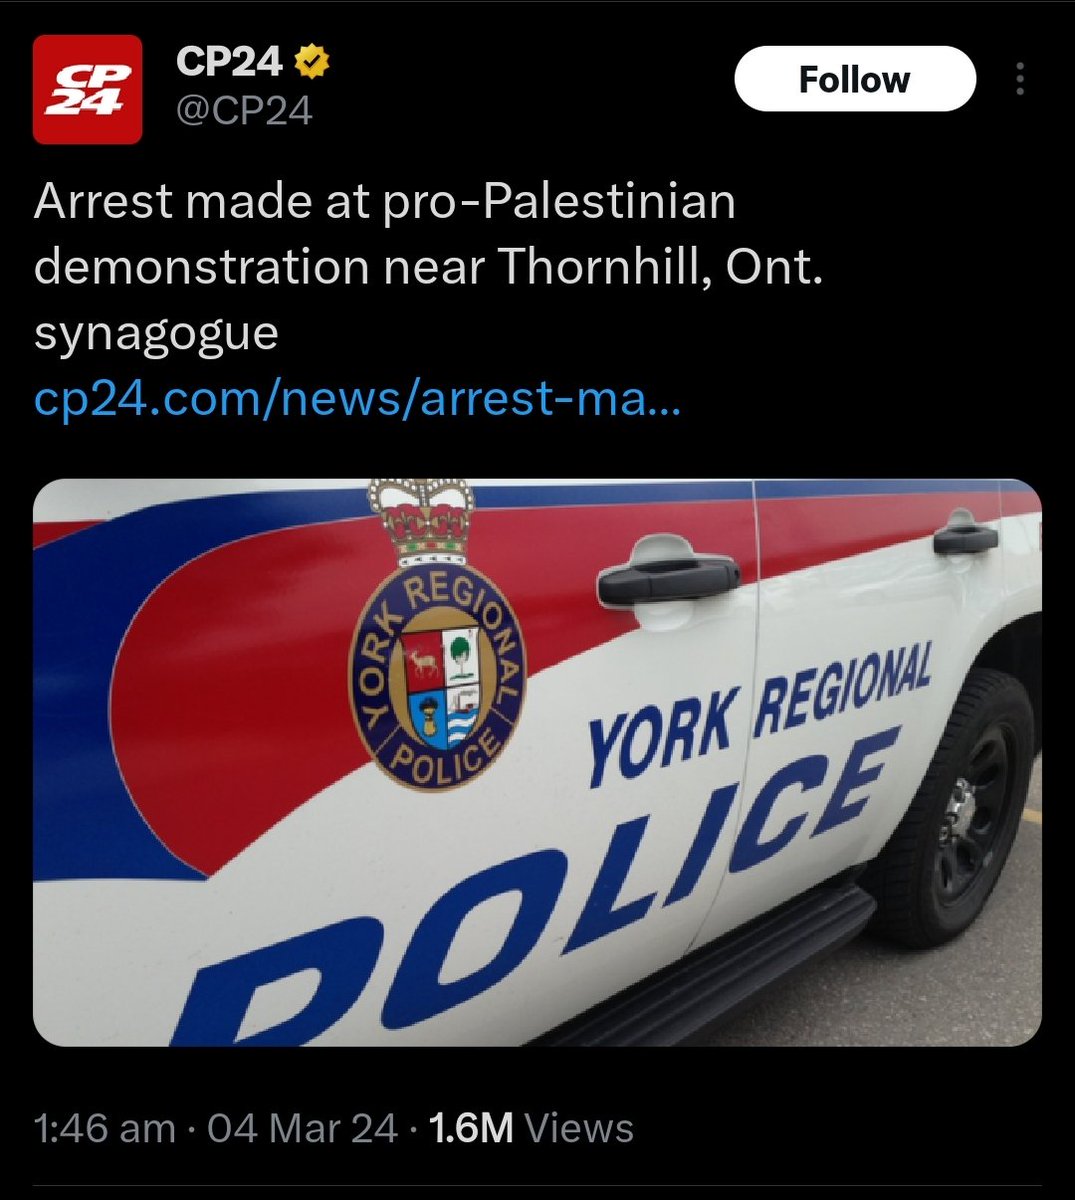 You'd never guess from this headline that a pro-israel guy shot up a Palestine solidarity protest with a nail gun. And that's the point.